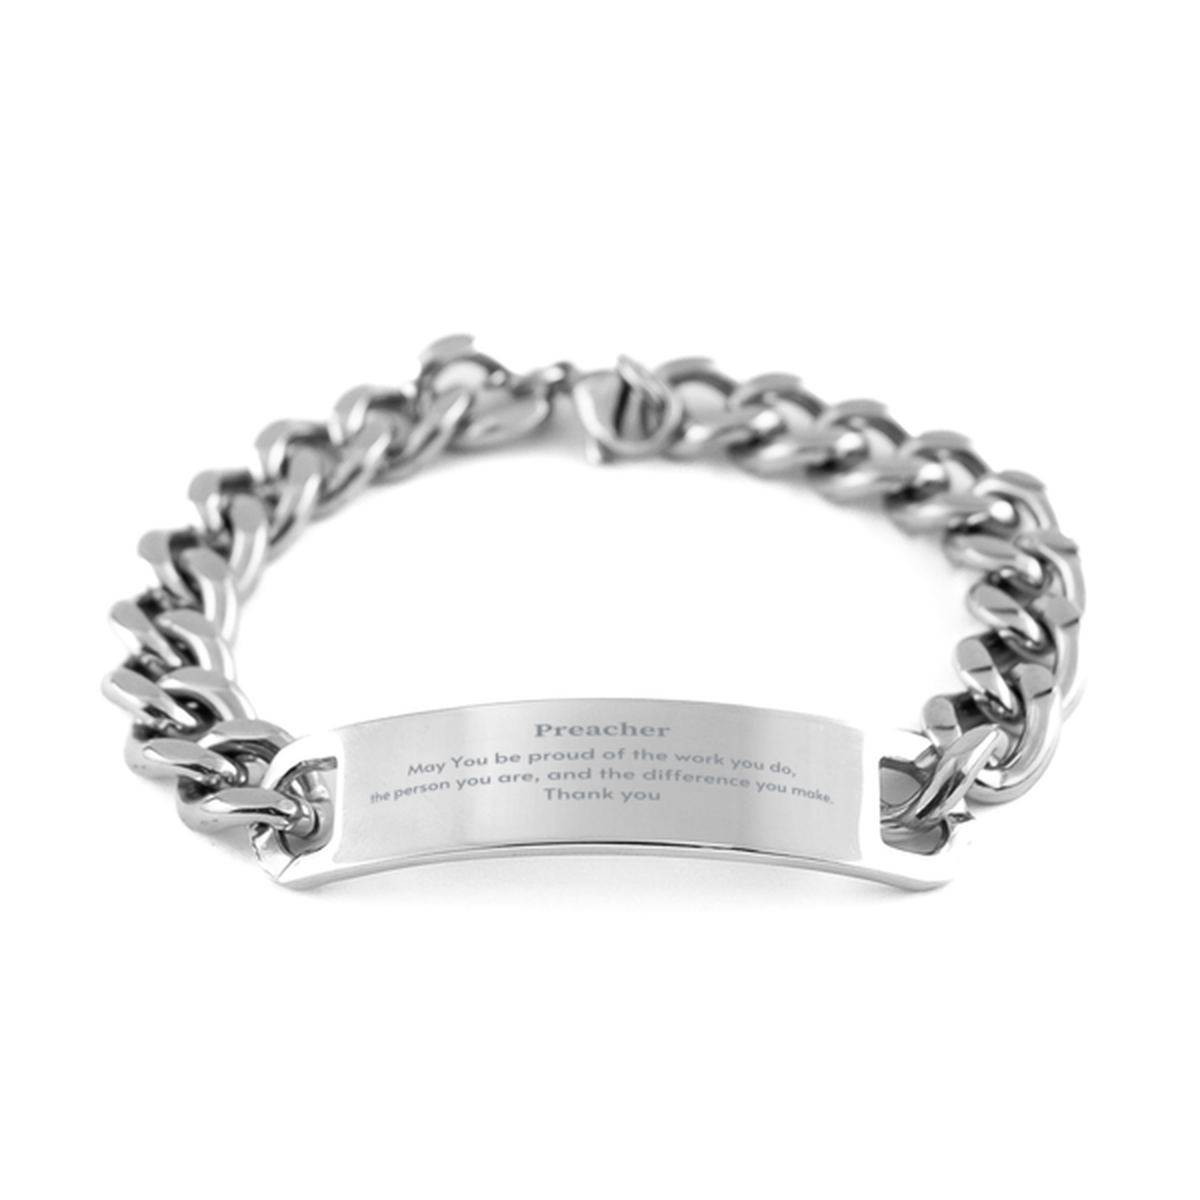 Heartwarming Cuban Chain Stainless Steel Bracelet Retirement Coworkers Gifts for Preacher, Preacher May You be proud of the work you do, the person you are Gifts for Boss Men Women Friends